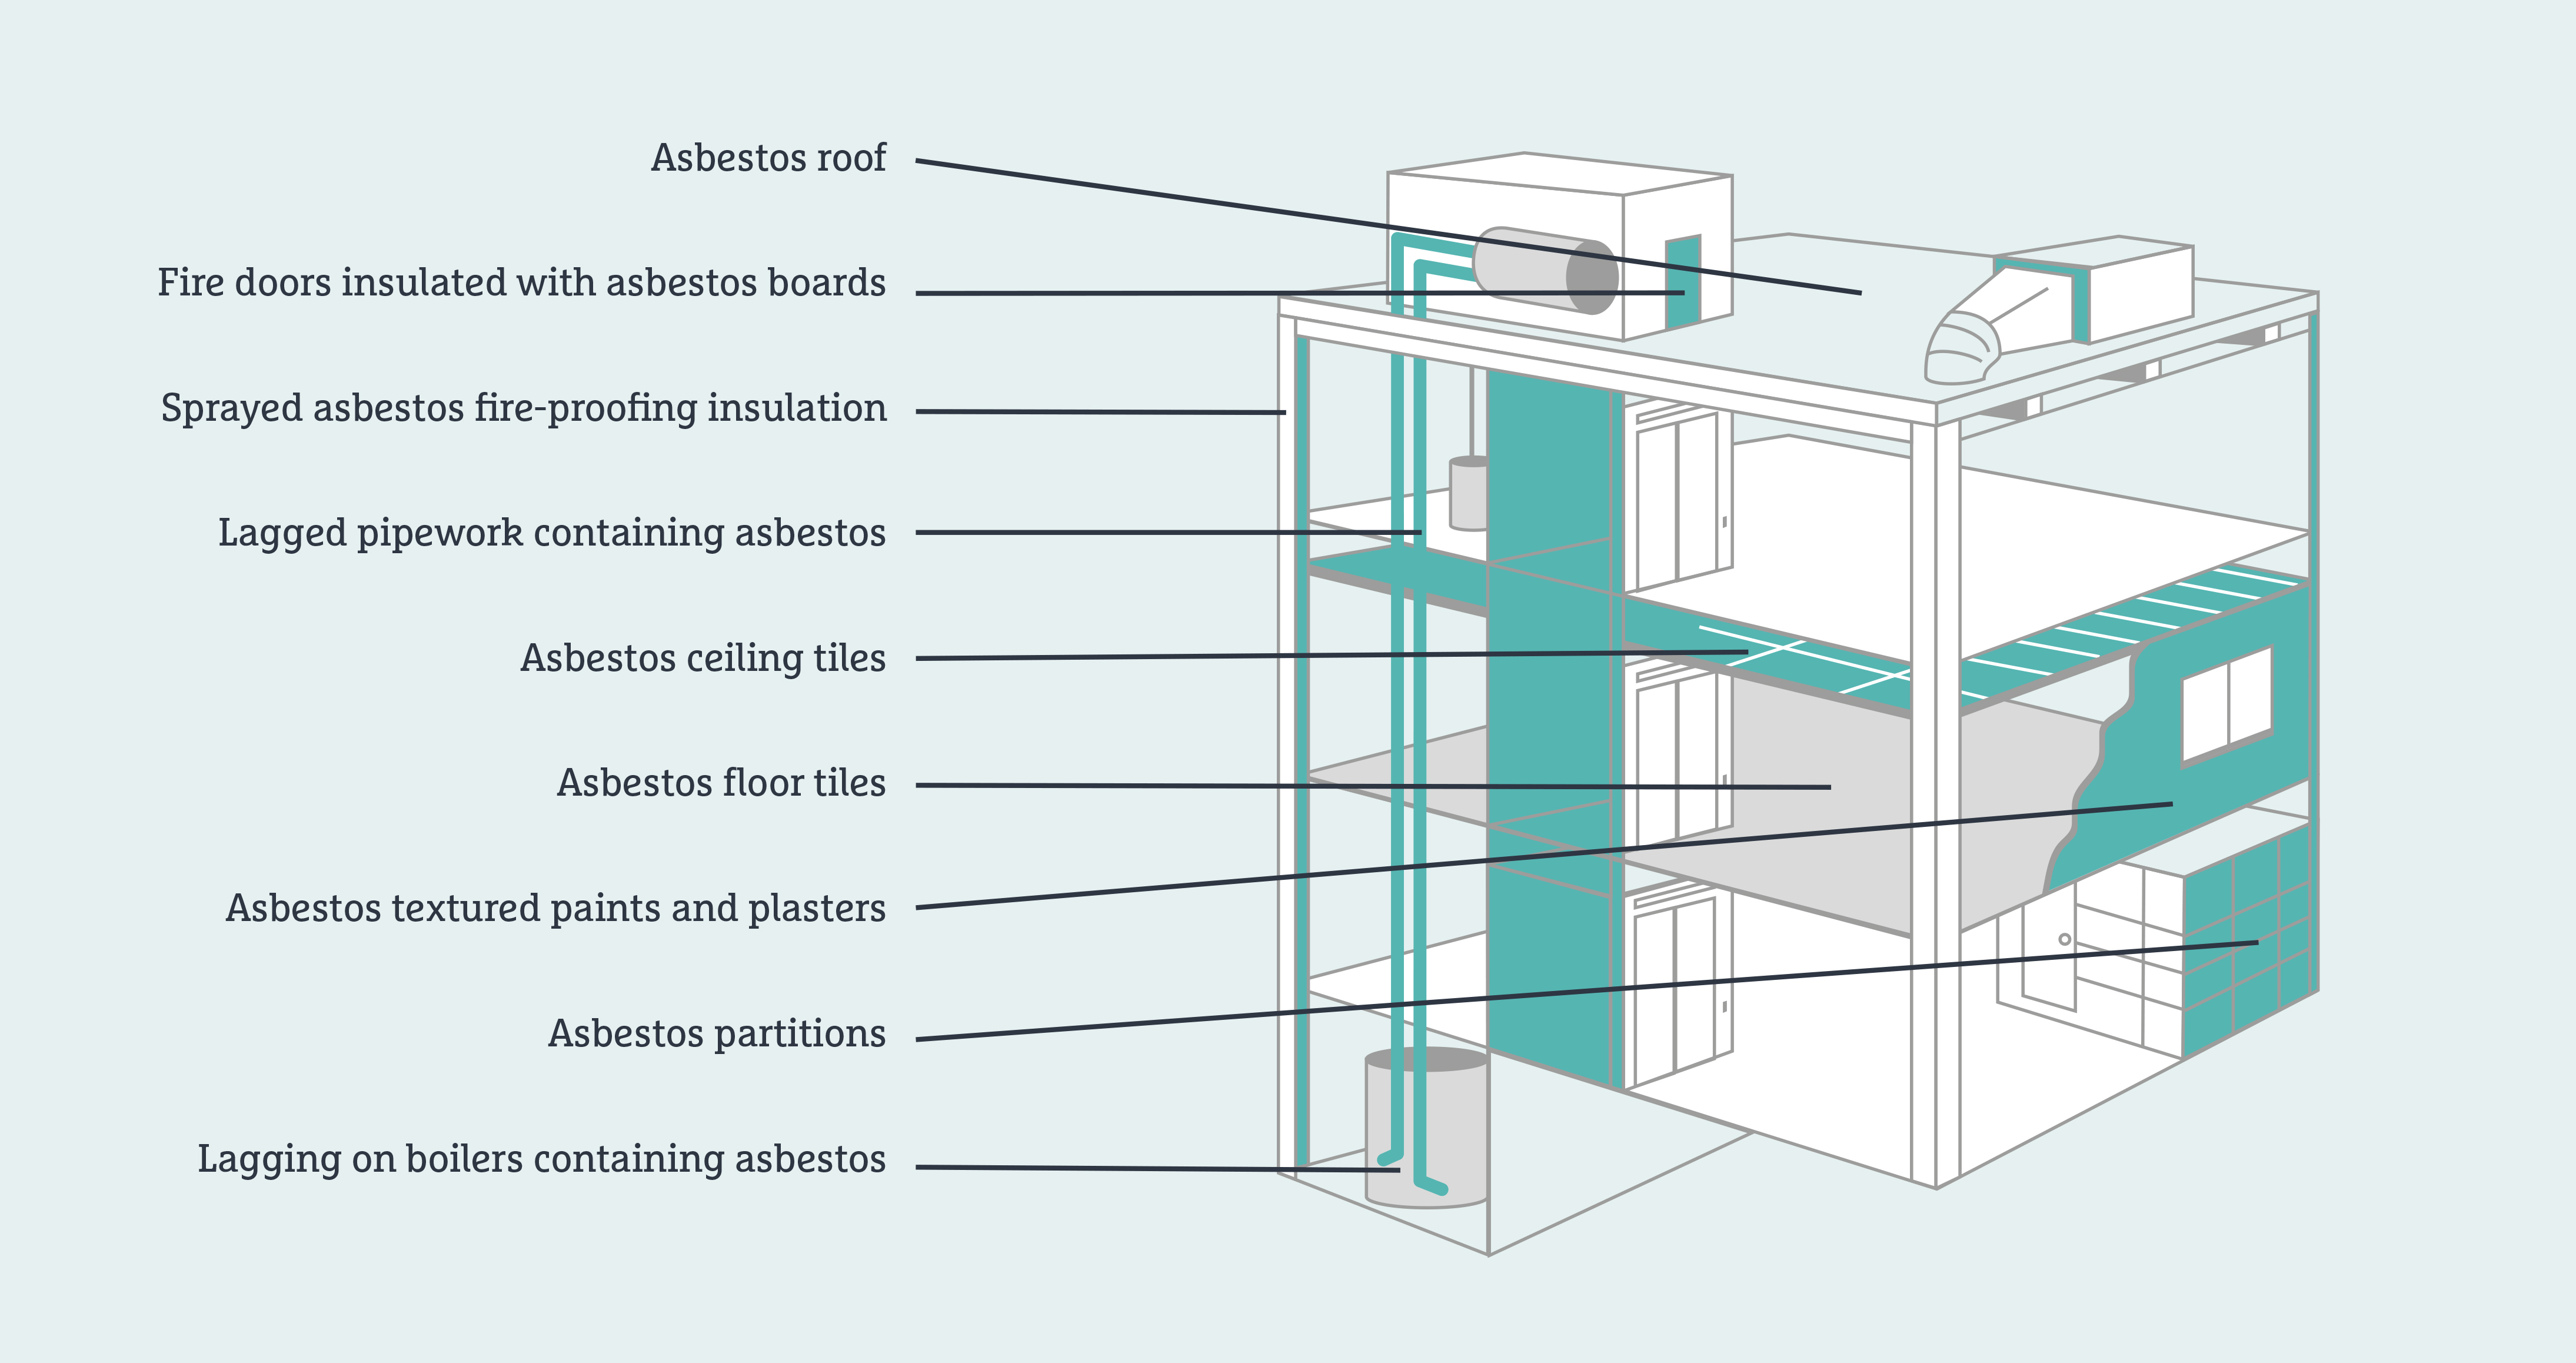 Diagram showing where asbestos may be found at work. Separate images and captions can be found below.